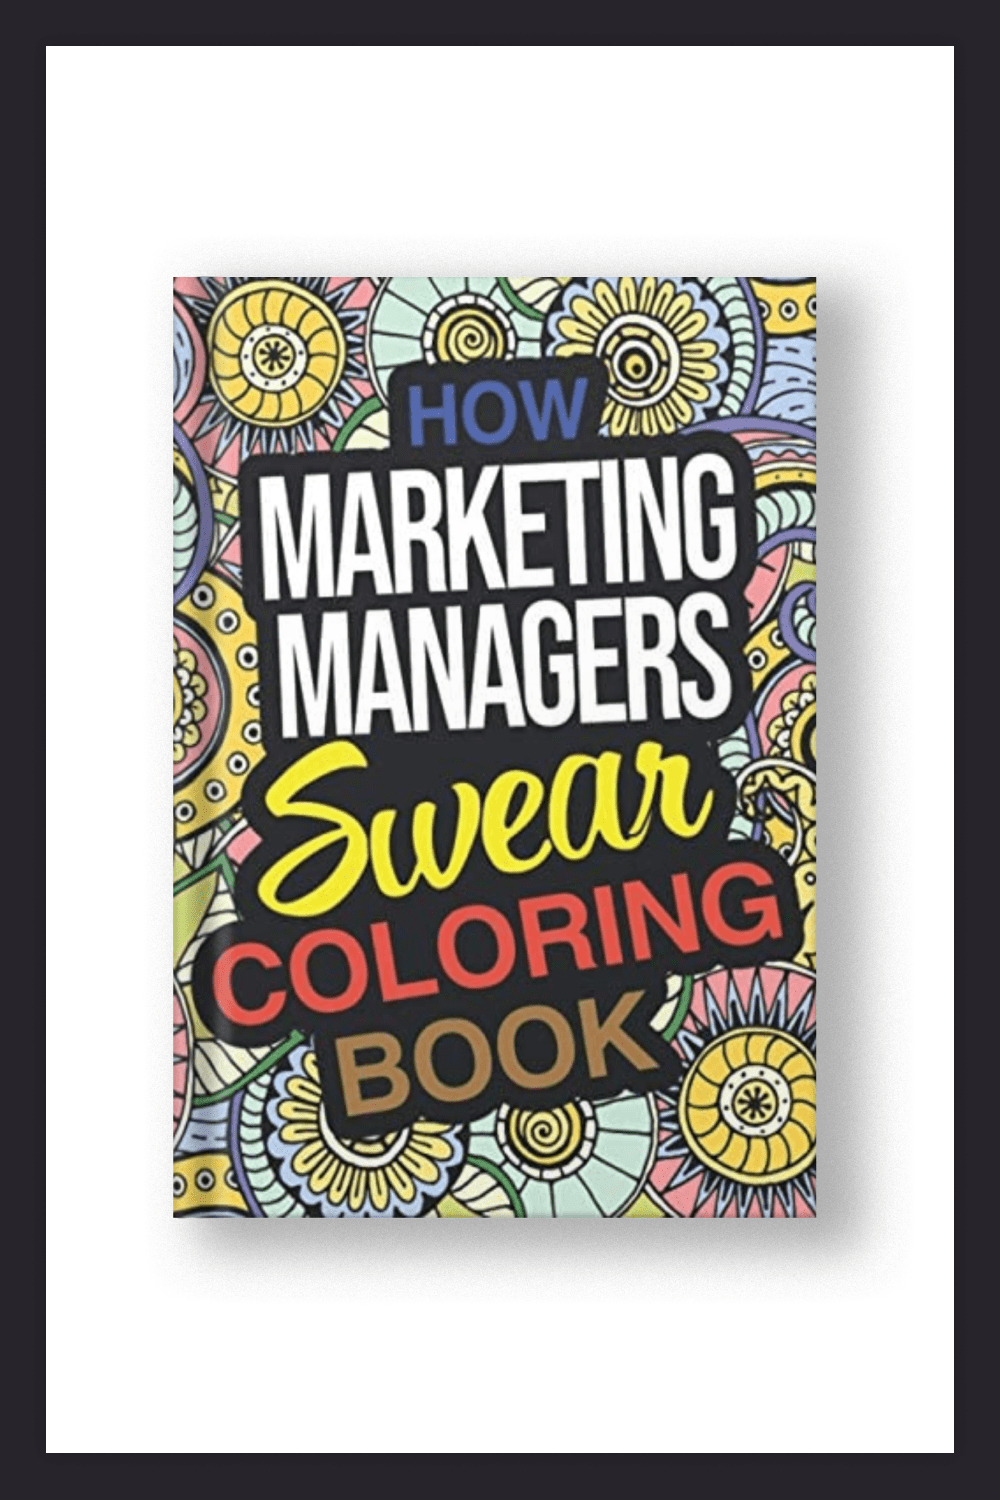 Cover of the How Marketing And Communications Specialists Swear Coloring Book.